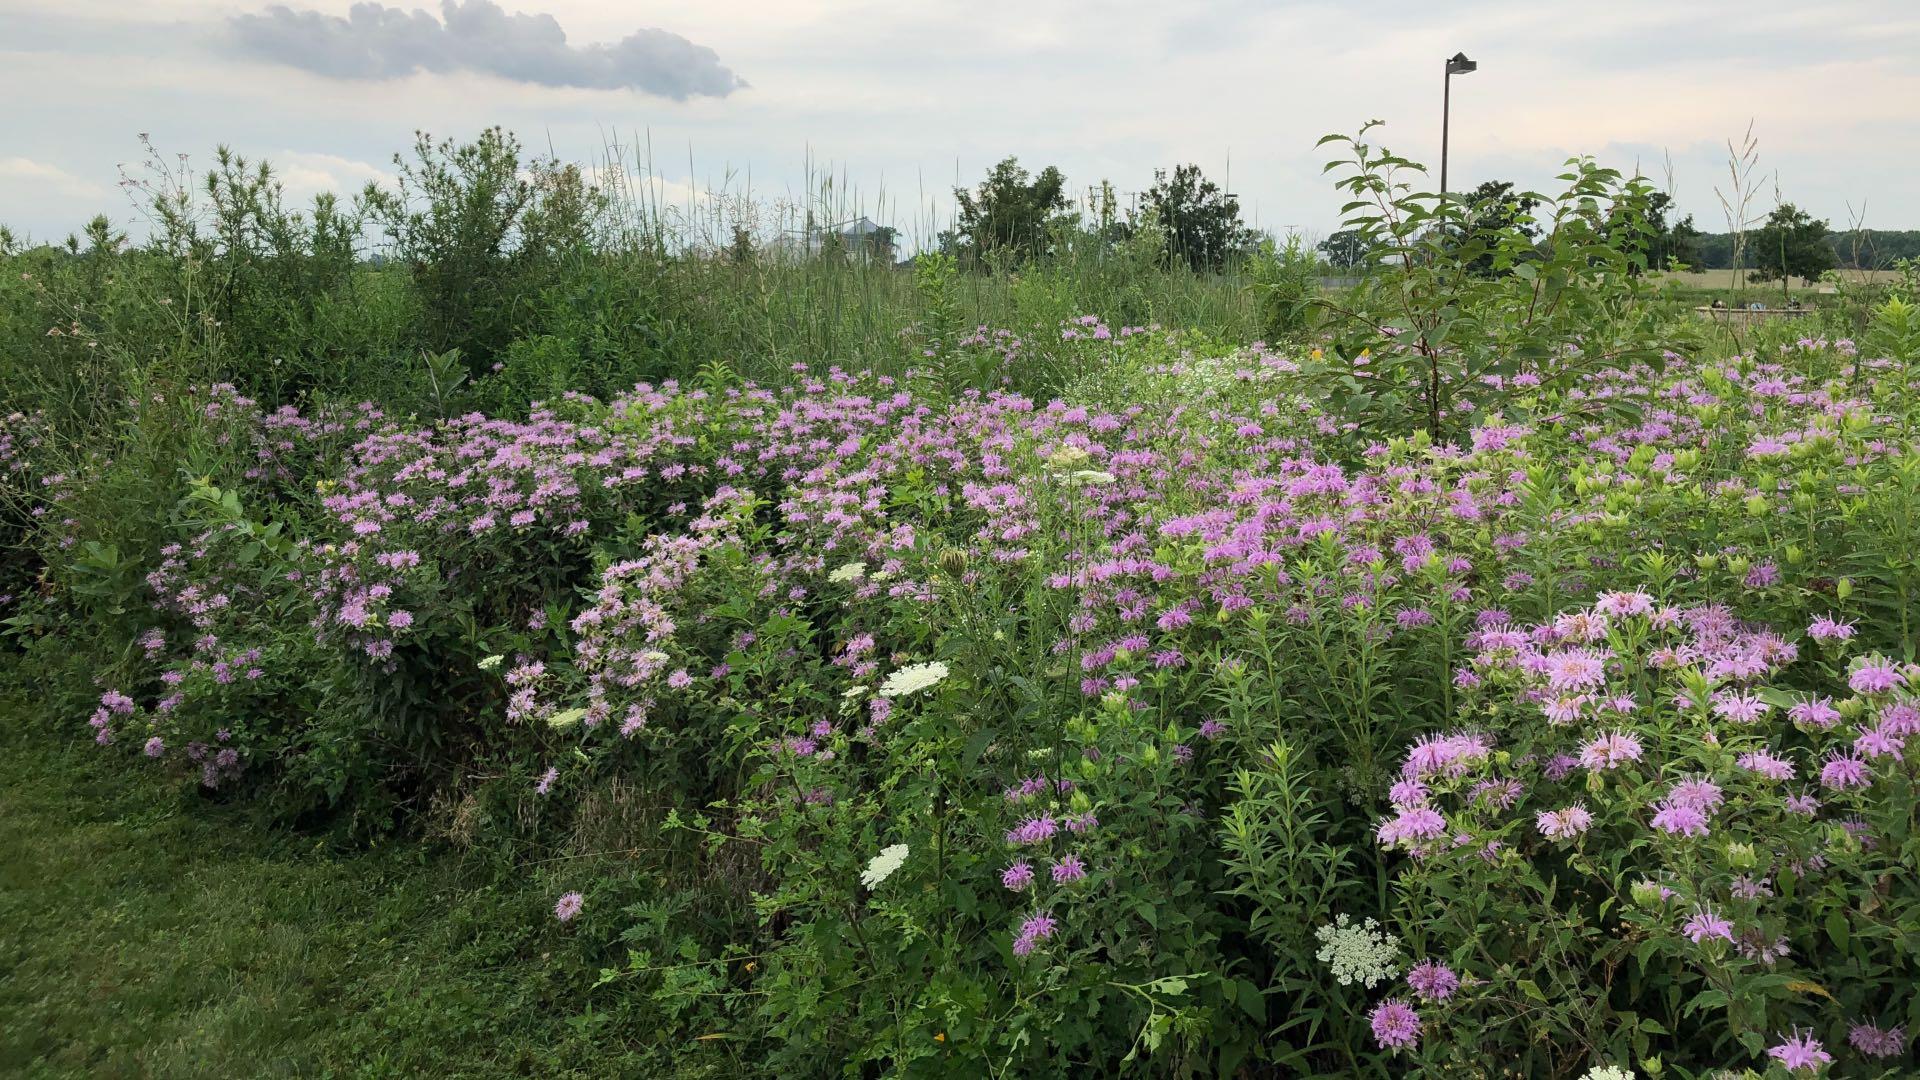 A swath of bee balm at Midewin National Tallgrass Prairie, where some 275 species of native plants are being re-introduced. (Patty Wetli / WTTW News)